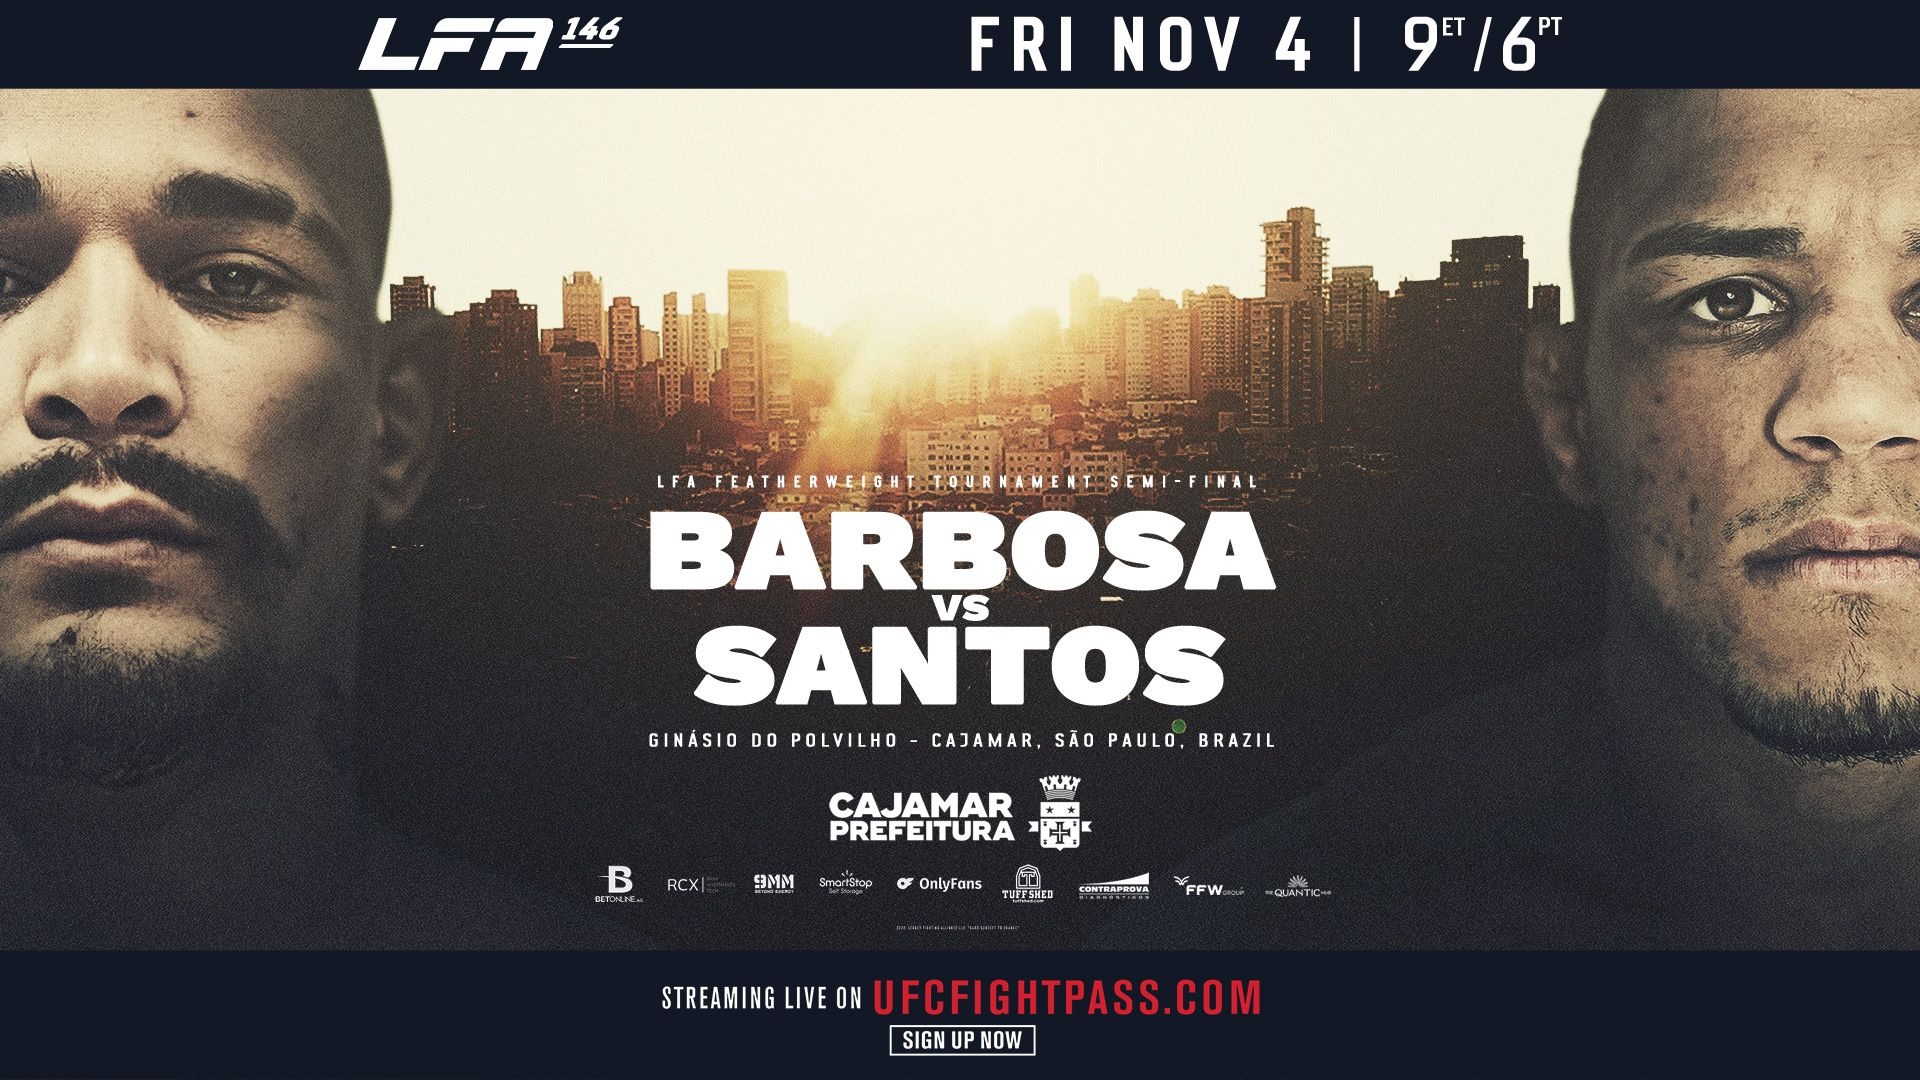 LFA brings the second Semi-Final in the Featherweight Tournament to Brazil at LFA 146 Legacy Fighting Alliance News